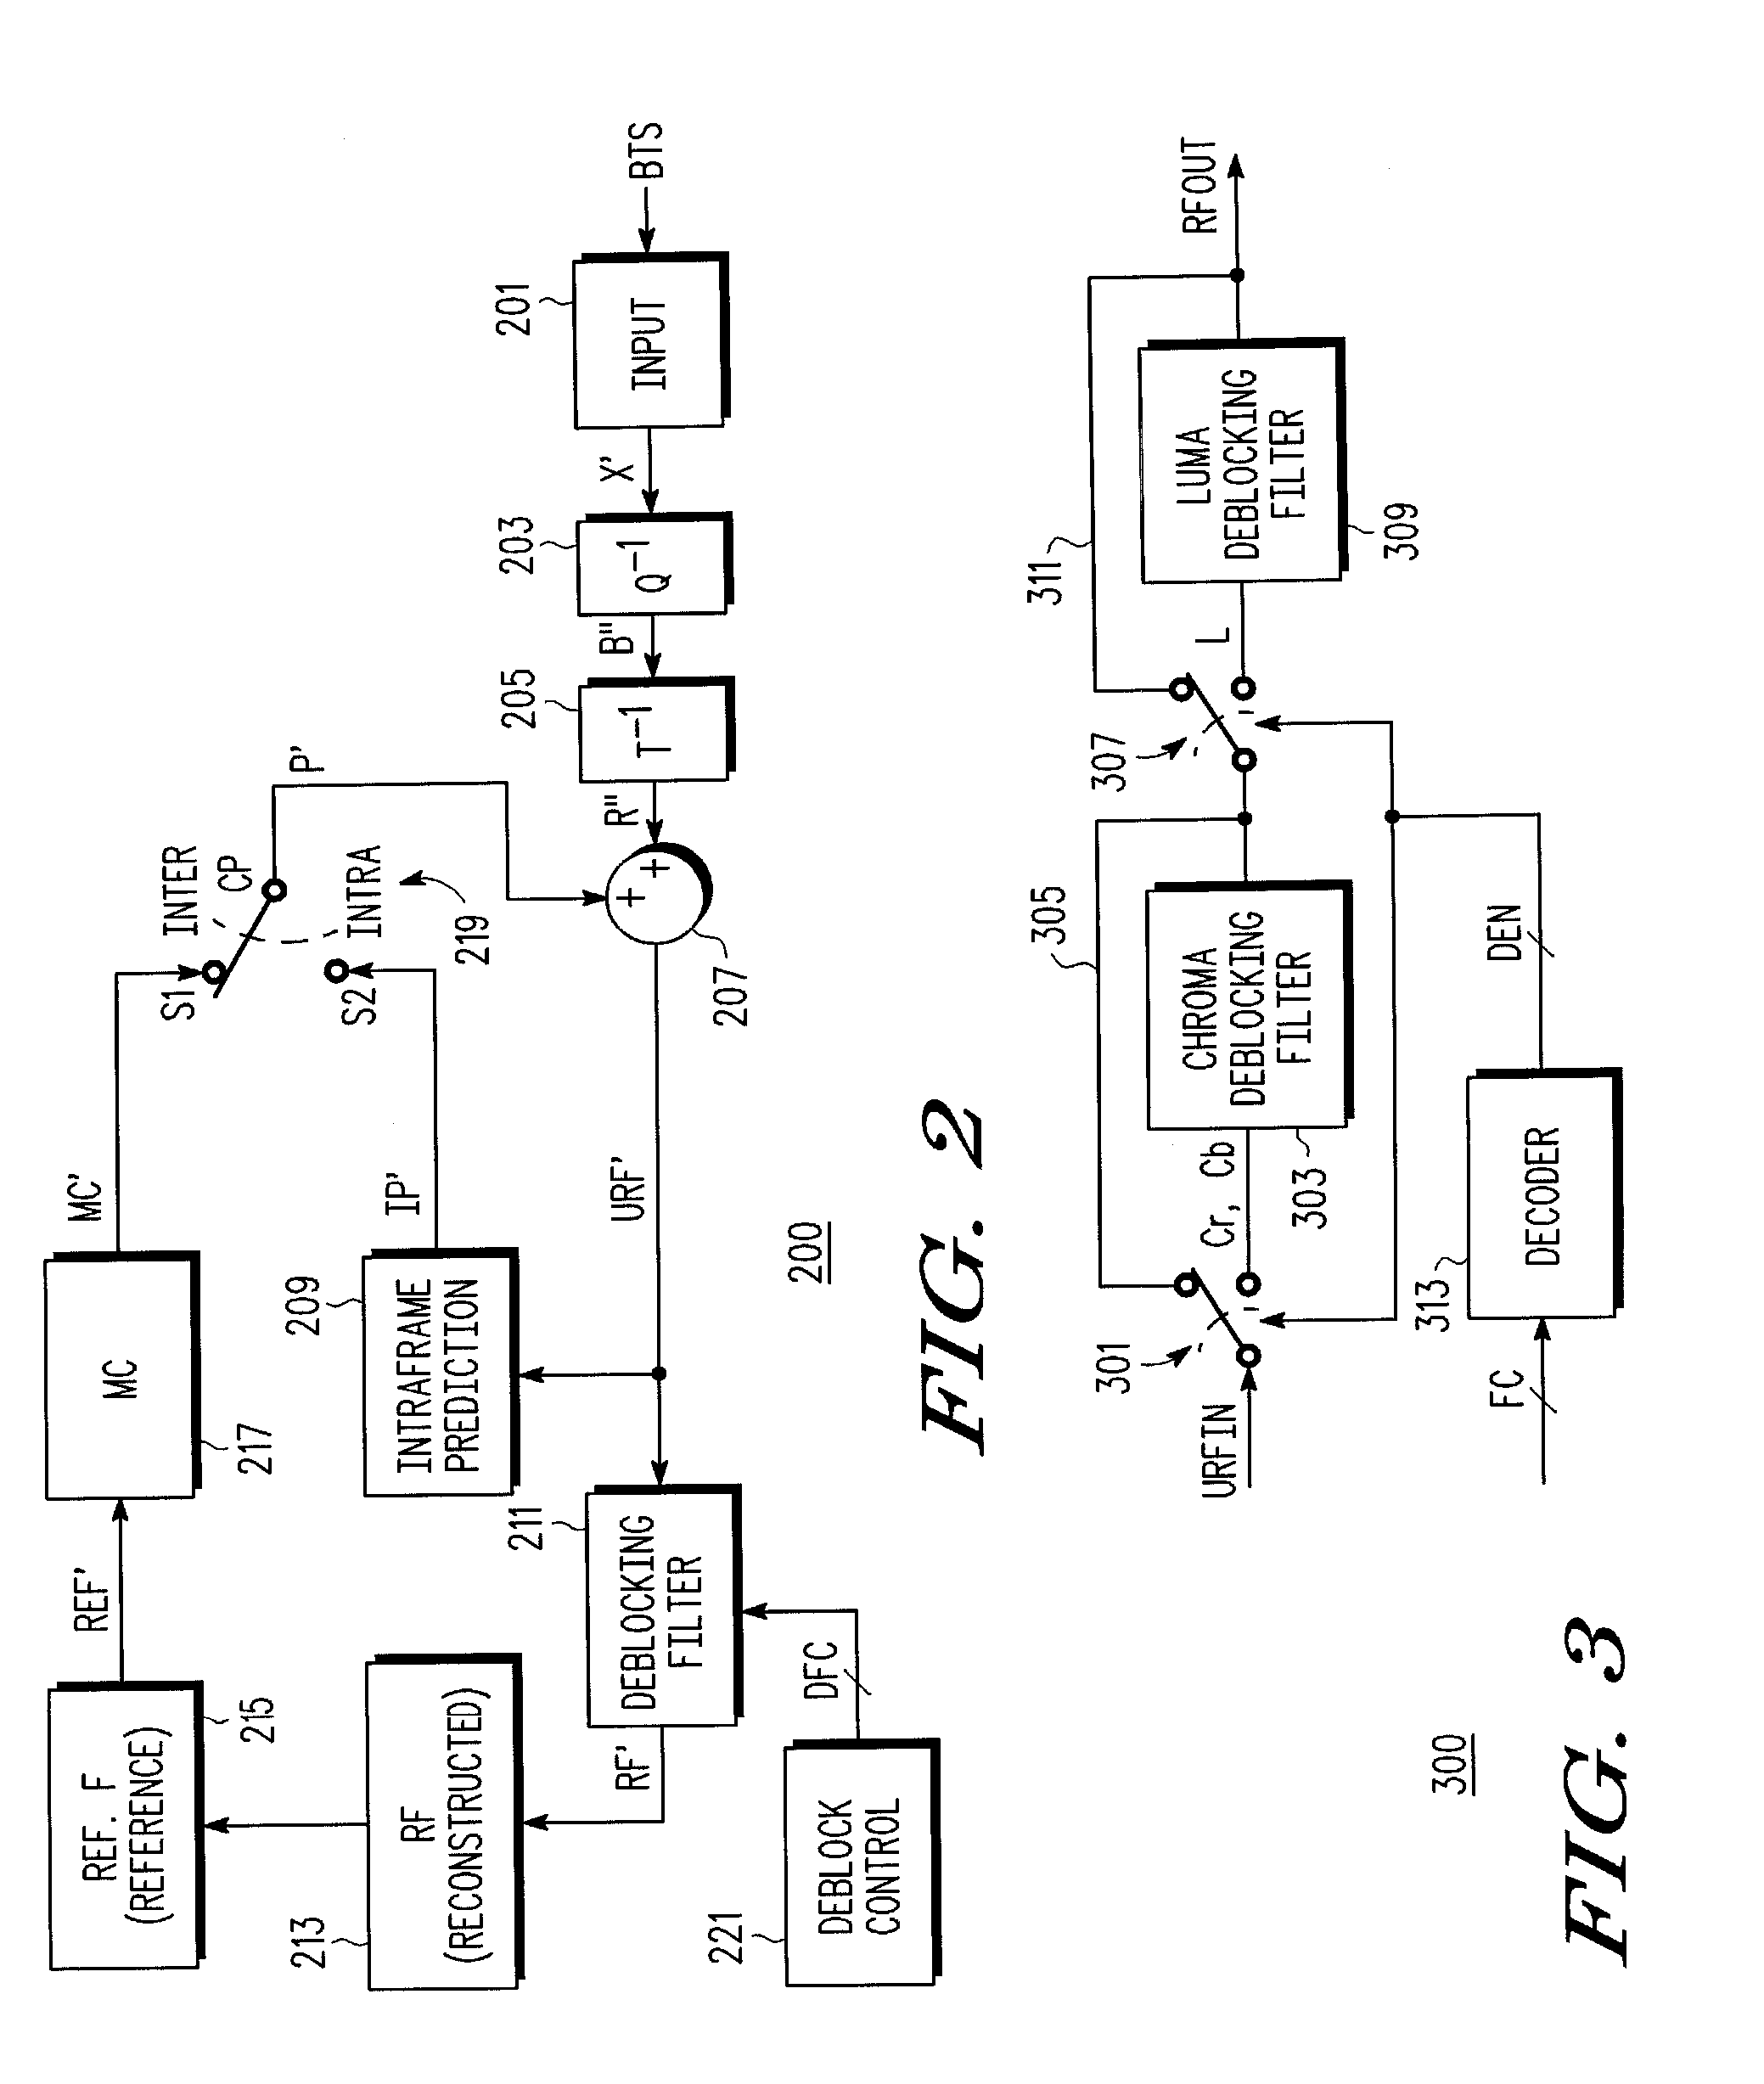 System and method of determining deblocking control flag of scalable video system for indicating presentation of deblocking parameters for multiple layers